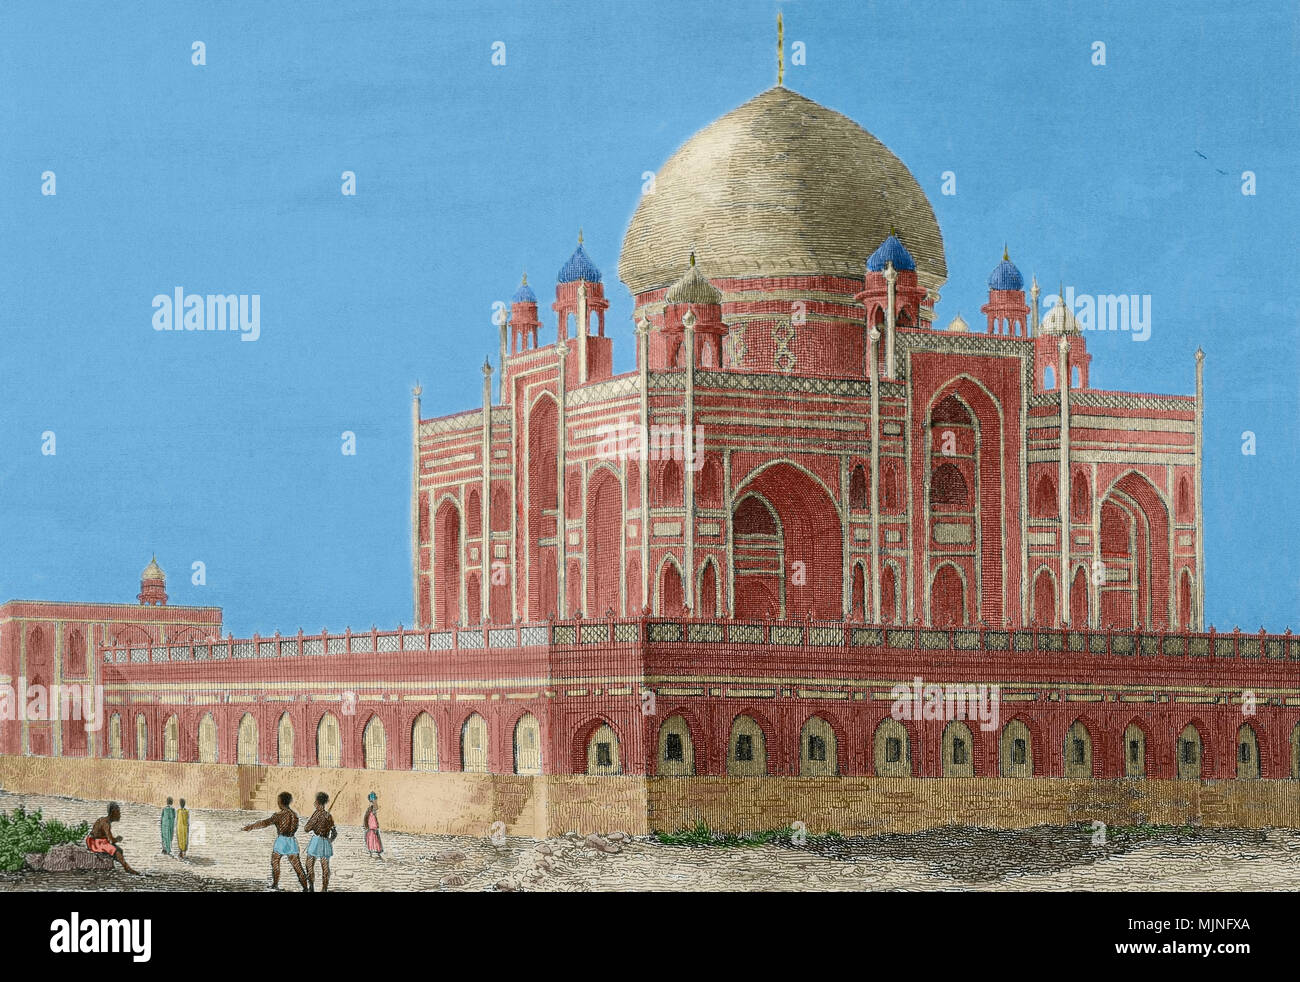 Mughal Emperor Humayun (Kabul, 1508-Delhi, 1556). Second emperor of the Mughal Empire. He governed Afghanistan, Pakistan and territories of the Northern India from 1530 to 1540. Tomb of Humayun in Delhi, India. It was commissioned by his first wife and chief consort, Empress Bega Begum (Haji Begum) in 1569-1570 and designed by the Persian architect Mirak Mirza Ghiyas. Engraving by Lemaitre after Kinnewel. From Panorama Universal-India, 1845. Later colouration. Stock Photo